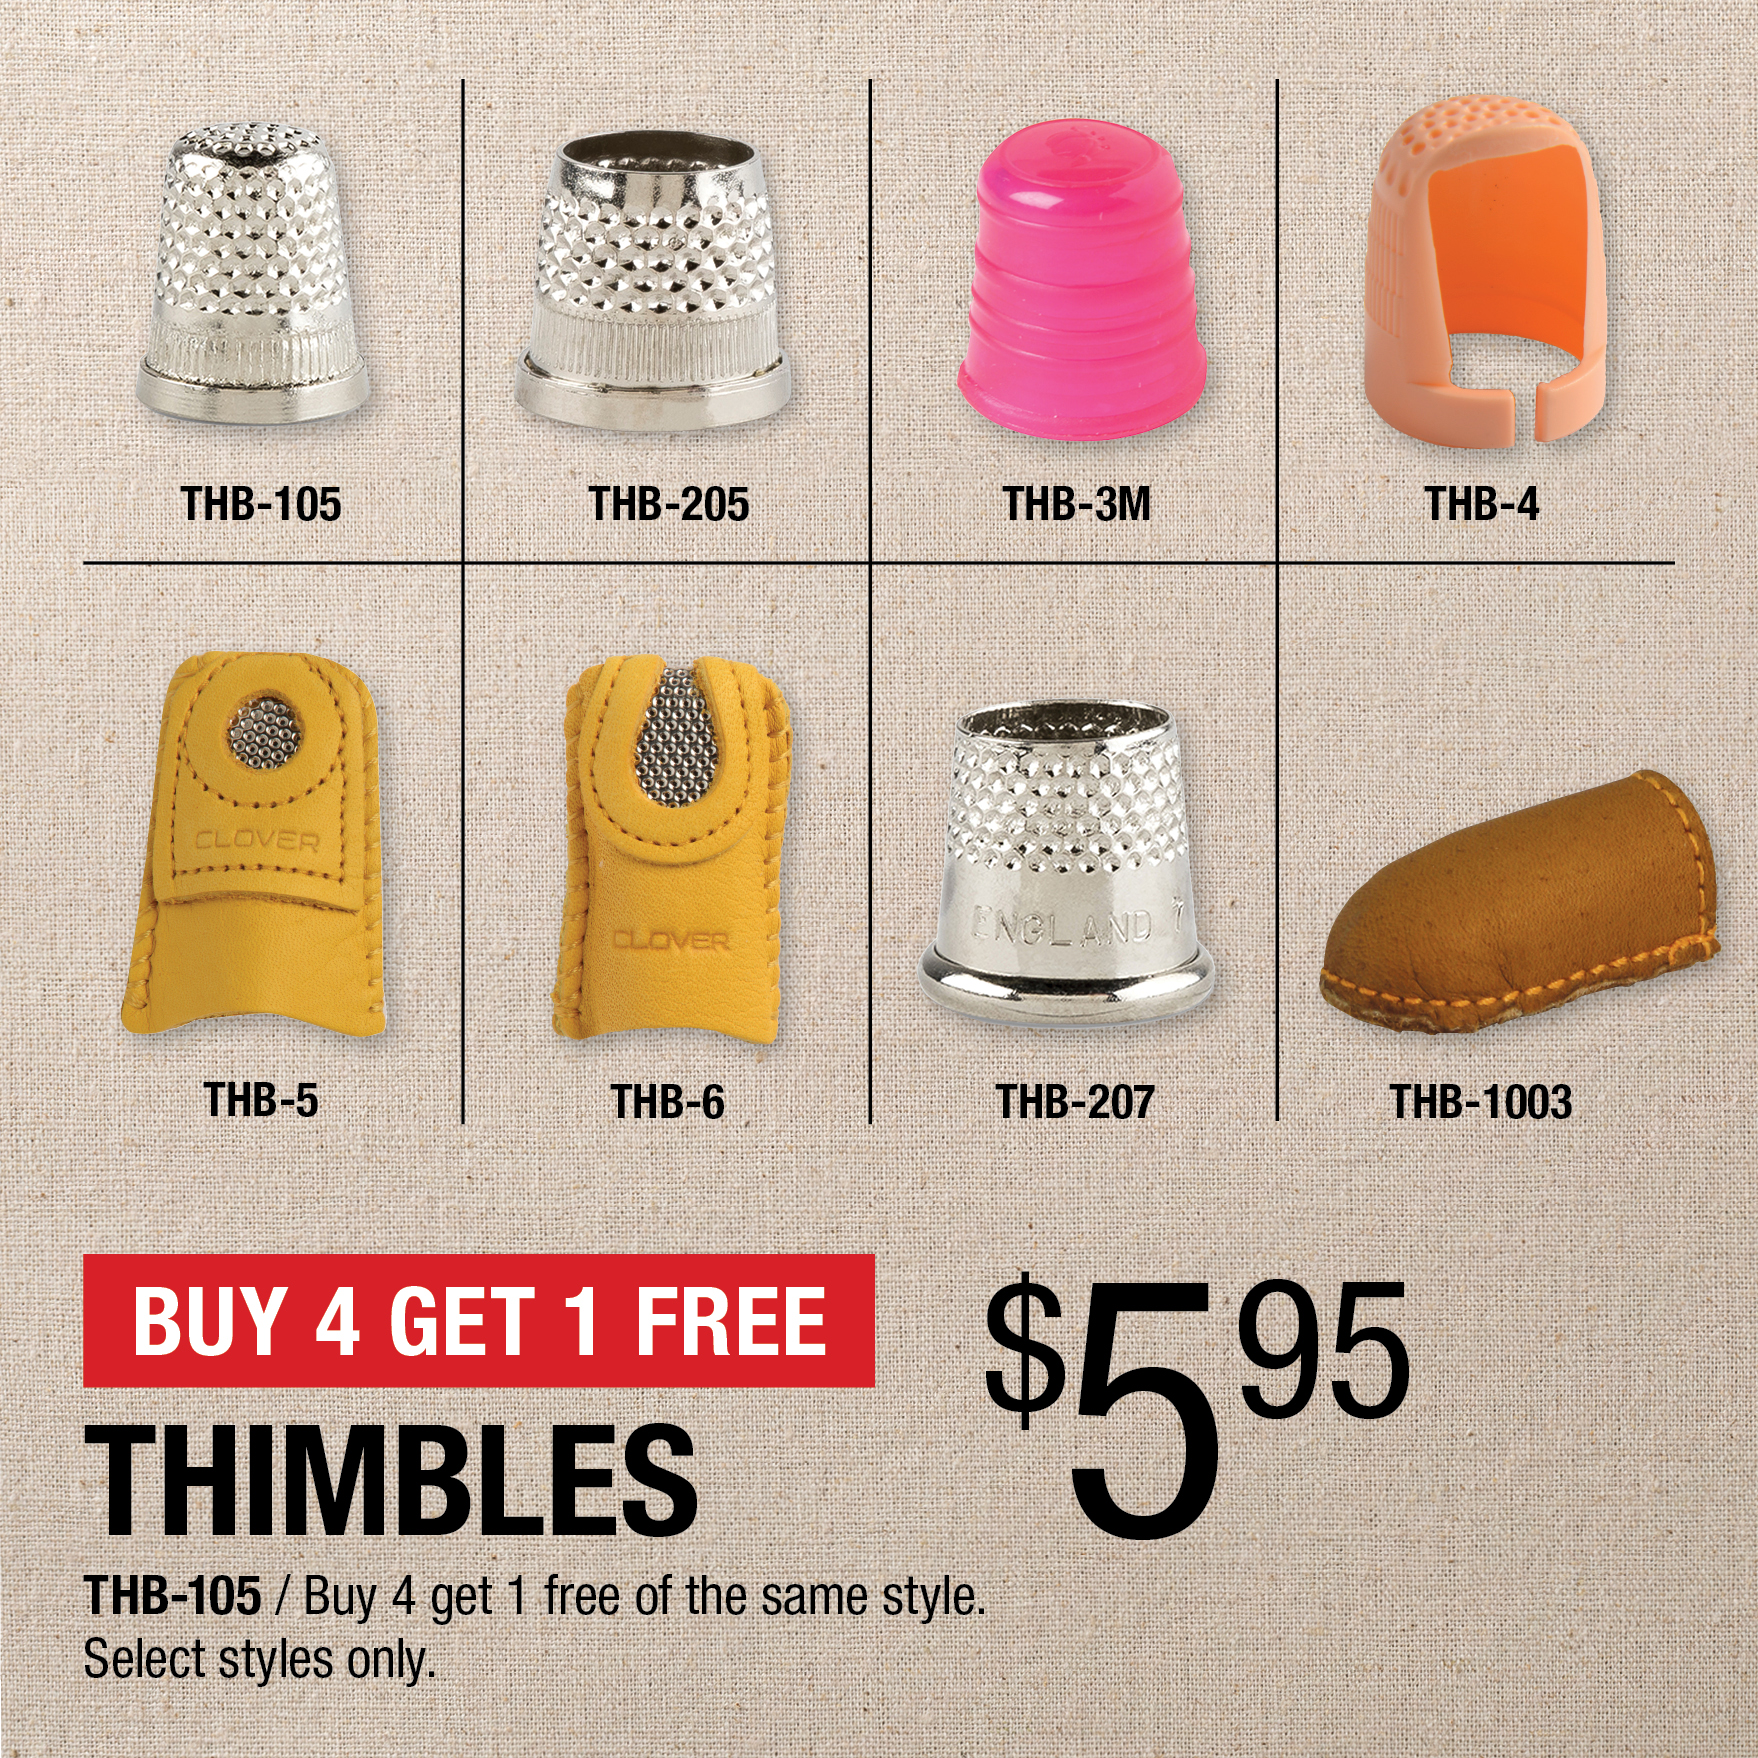 Buy 4 Get 1 Free - Thimbles $5.95 / THB-105 / Buy 4 get 1 free of the same style / Select styles only.